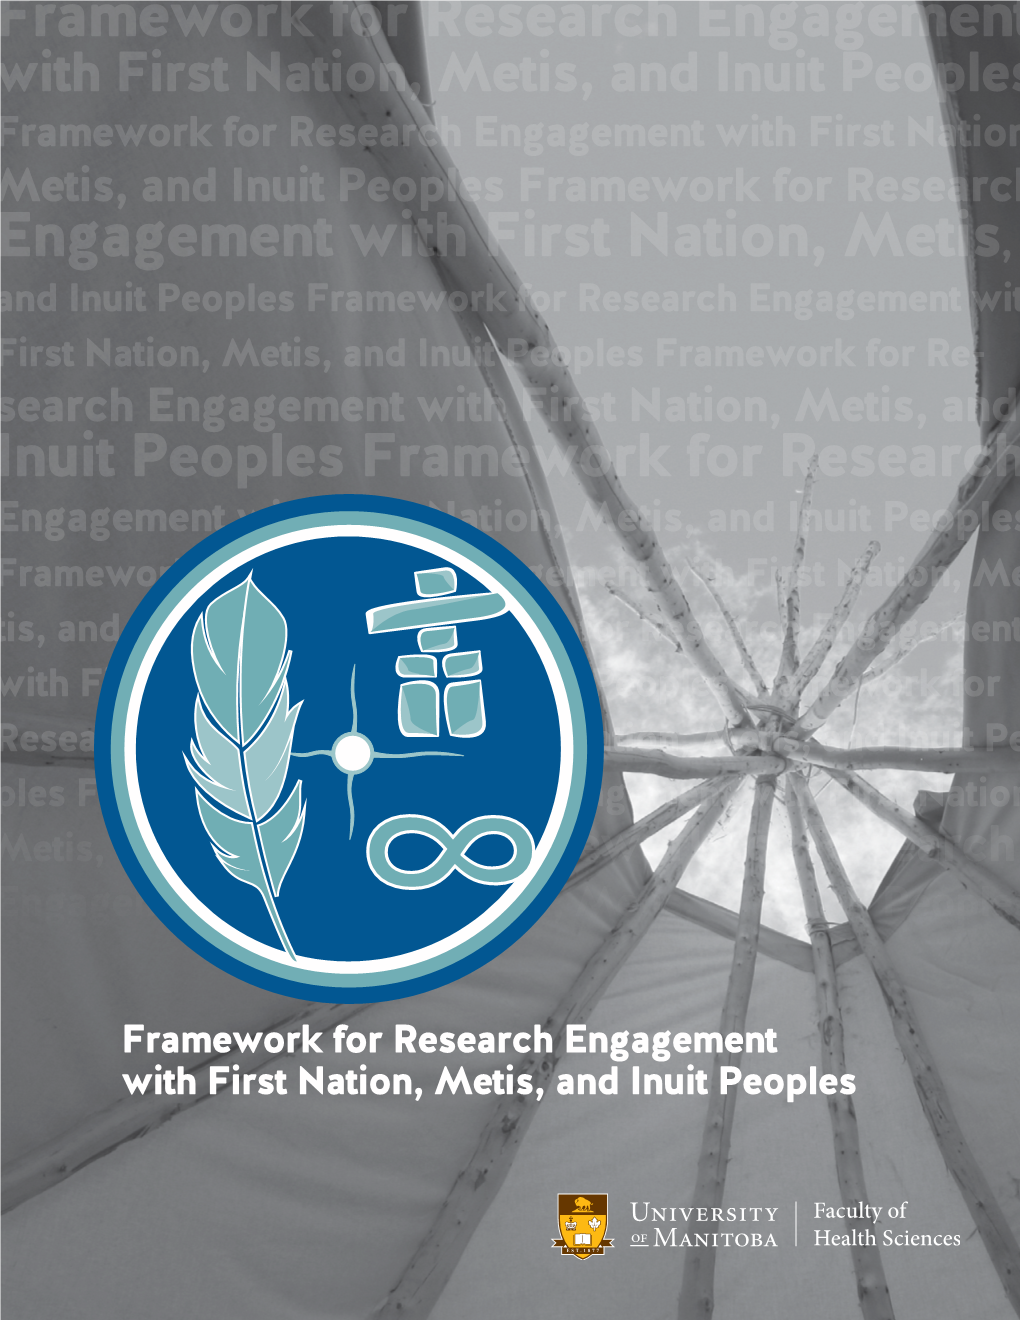 Framework for Research Engagement with First Nation, Metis